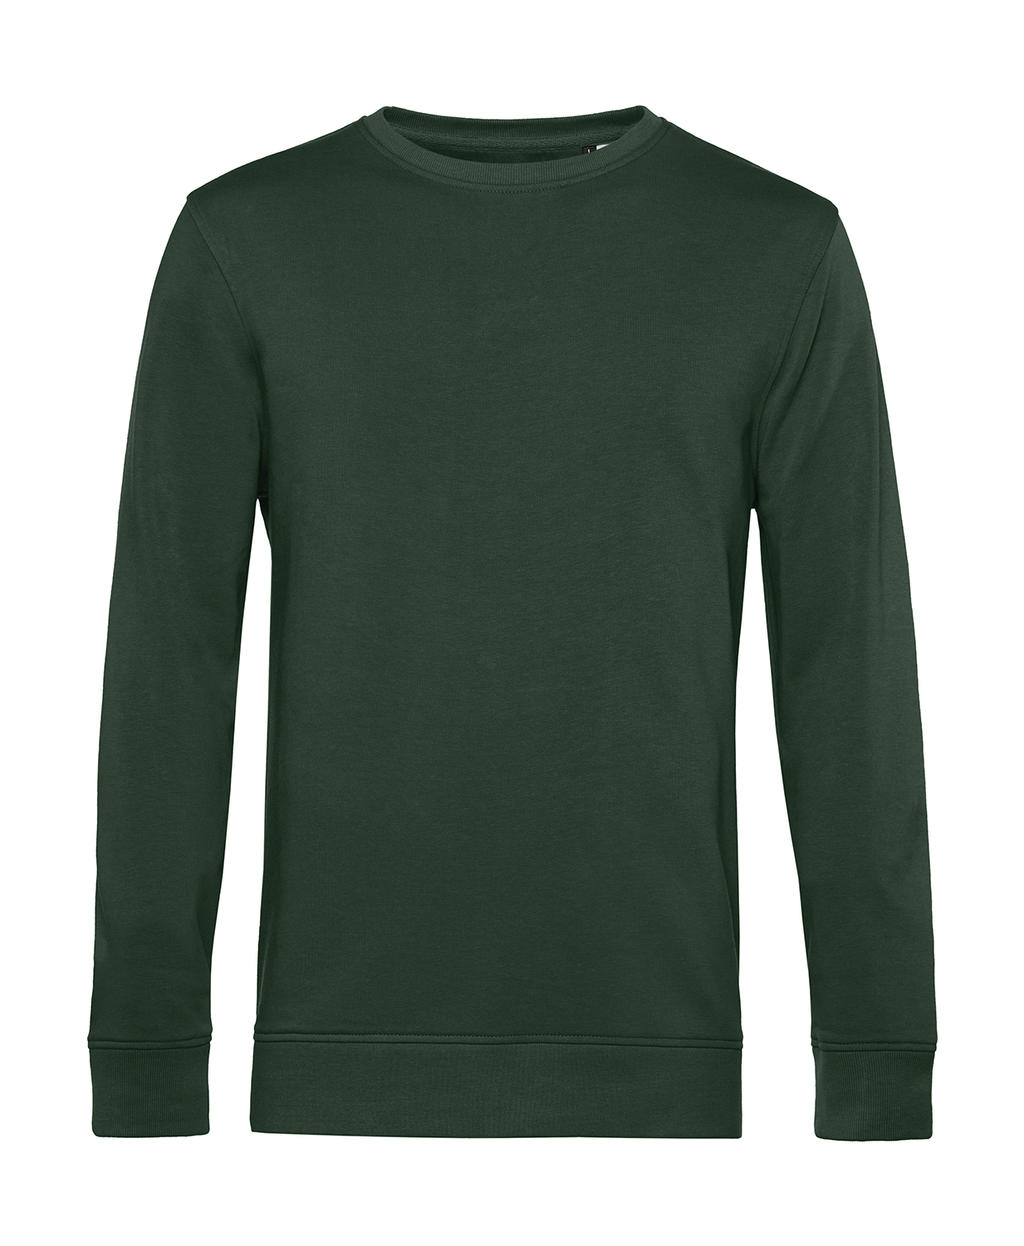  Organic Inspire Crew Neck_? in Farbe Forest Green